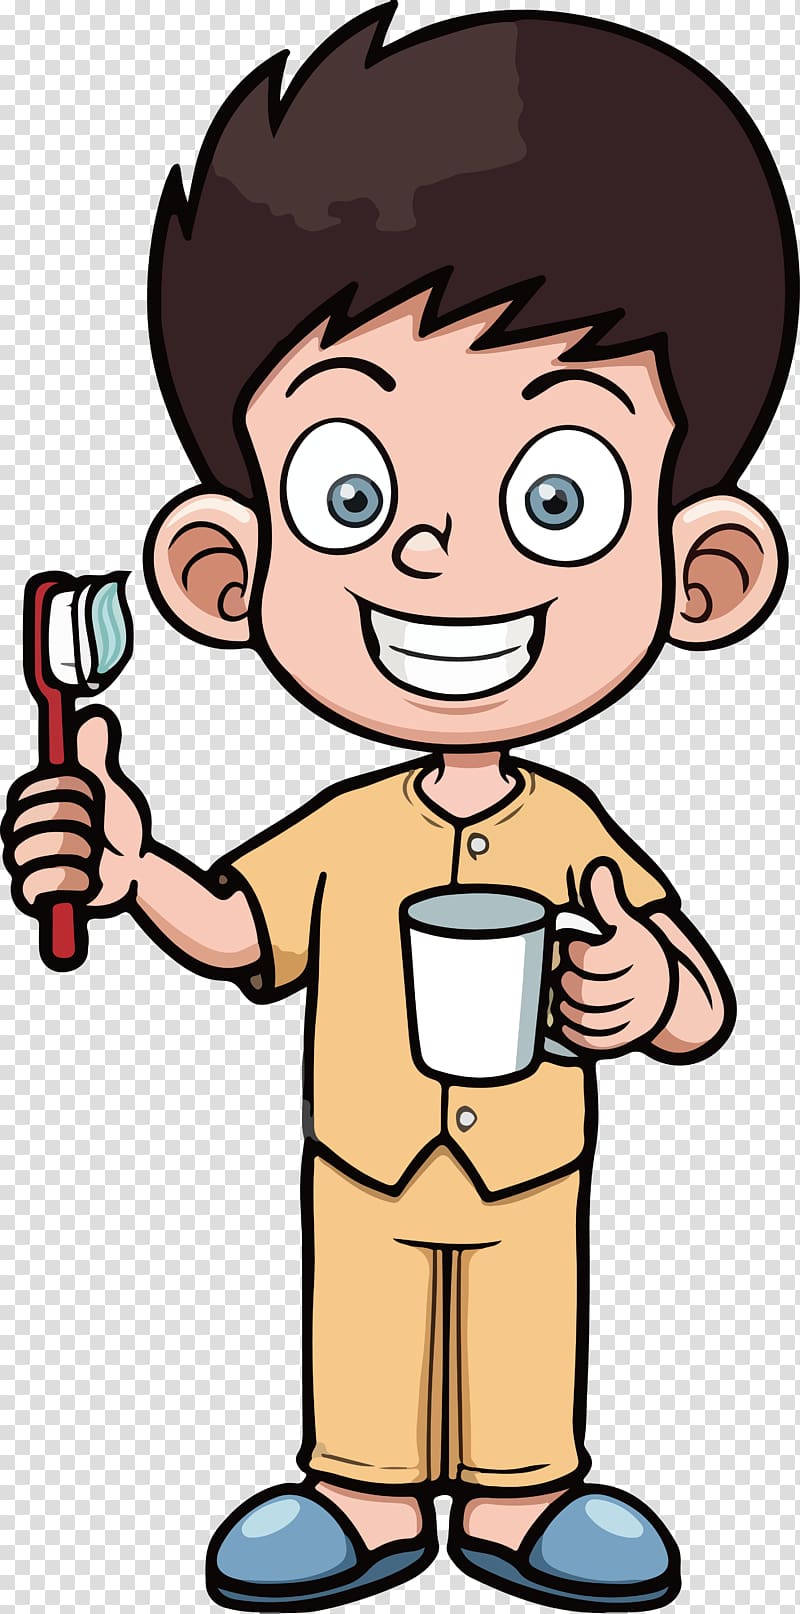 Tooth brushing Dentistry Cartoon, Cartoon brushing boy transparent background PNG clipart